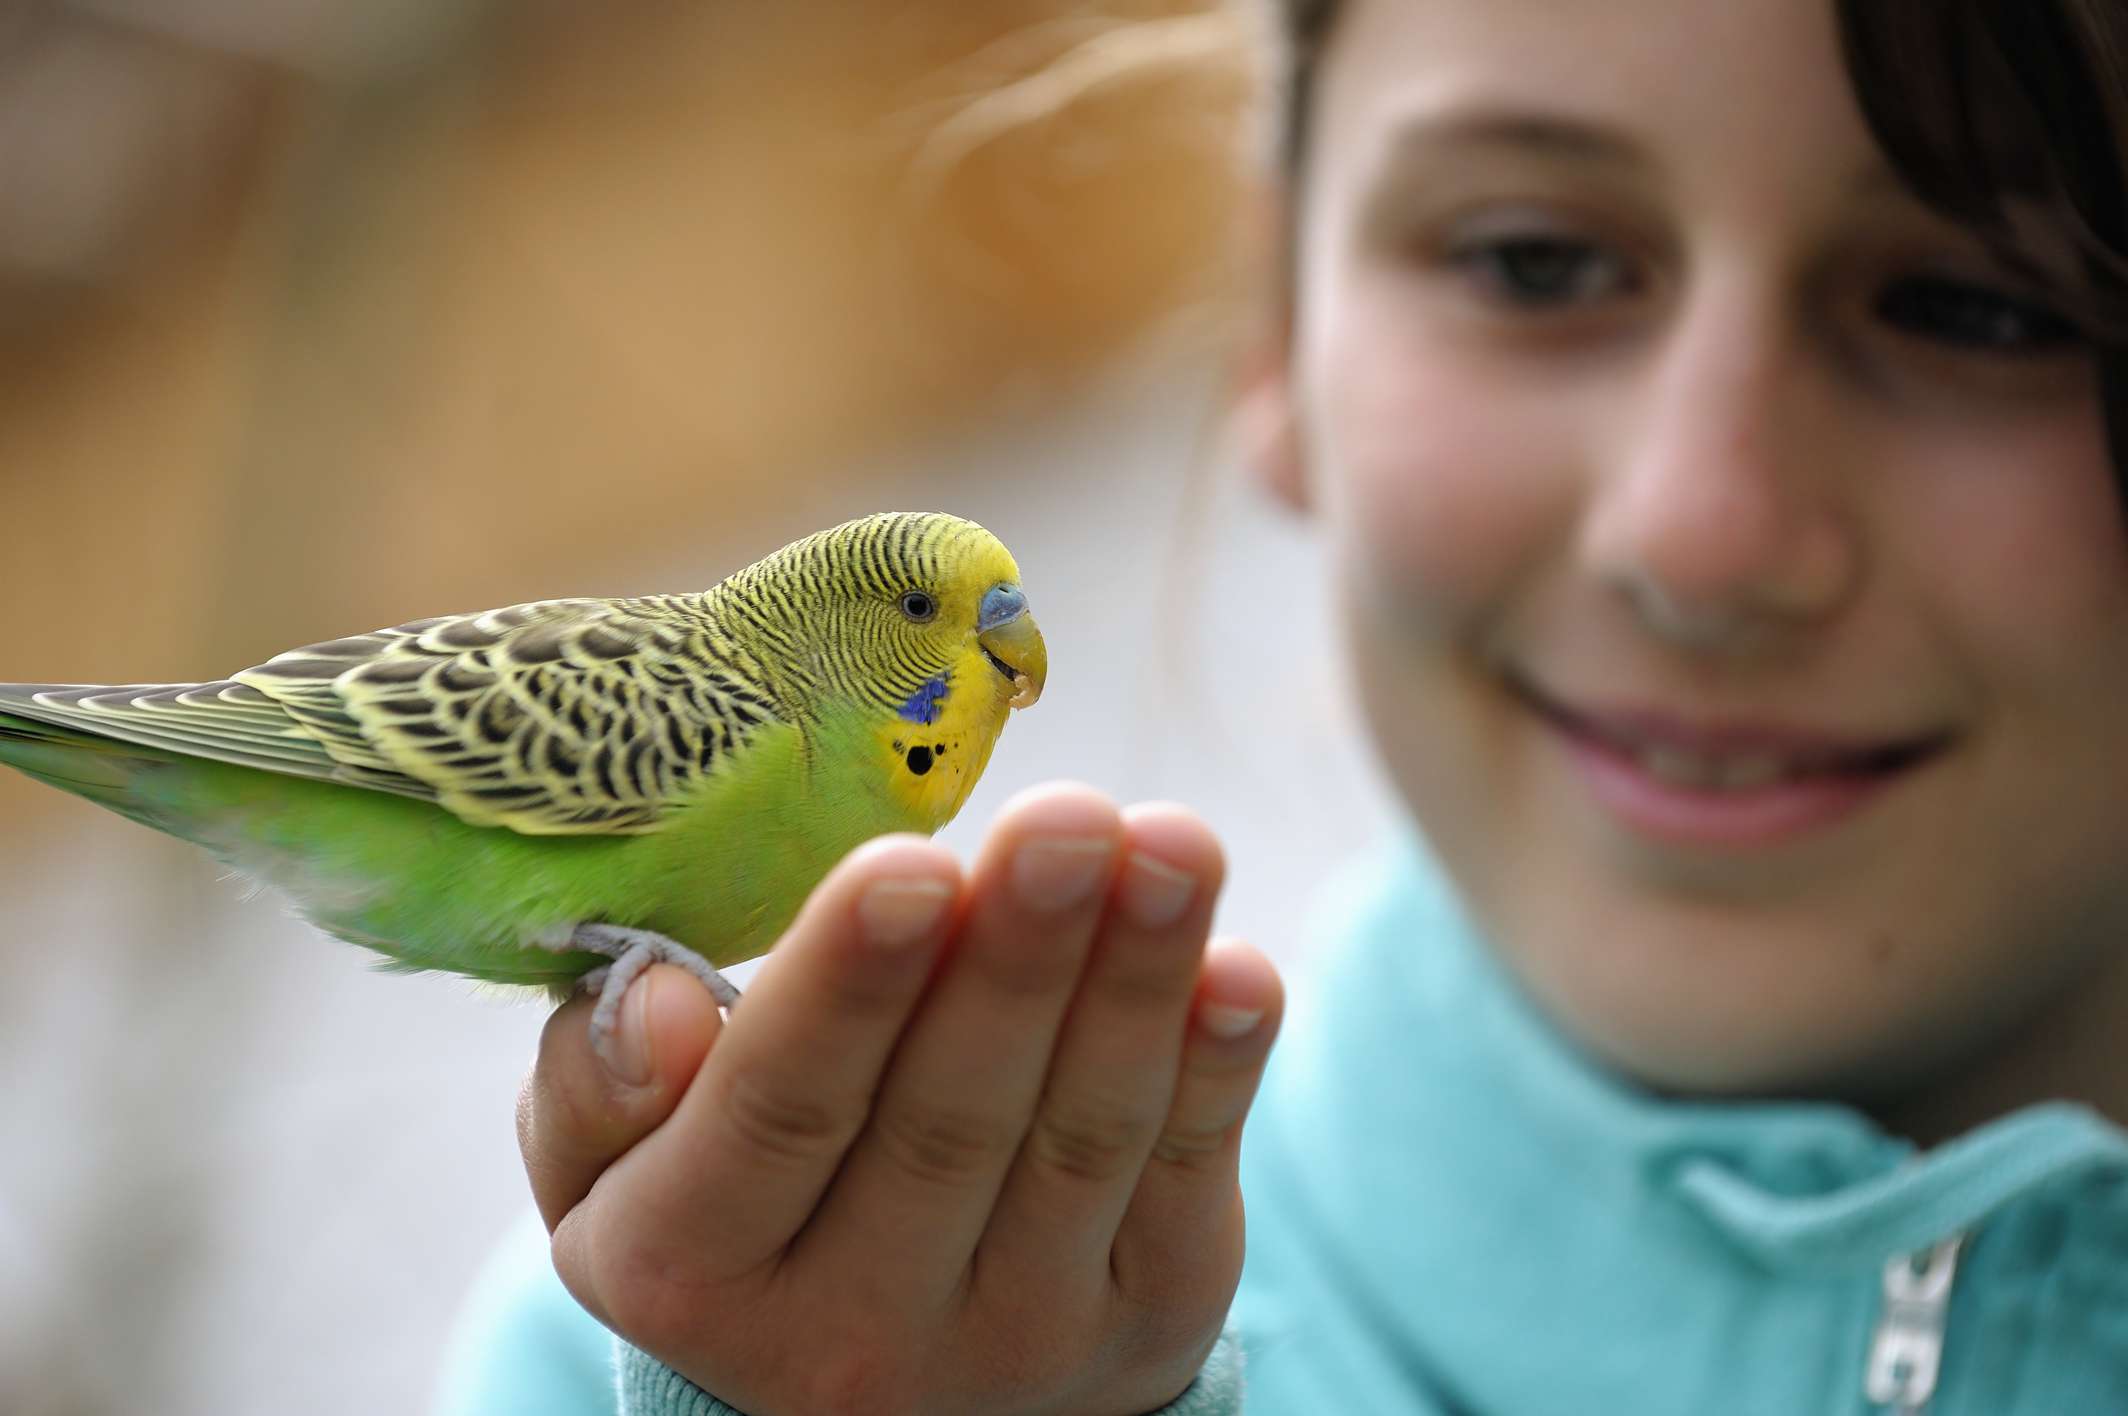 Girl with a green budgie sitting on her hand